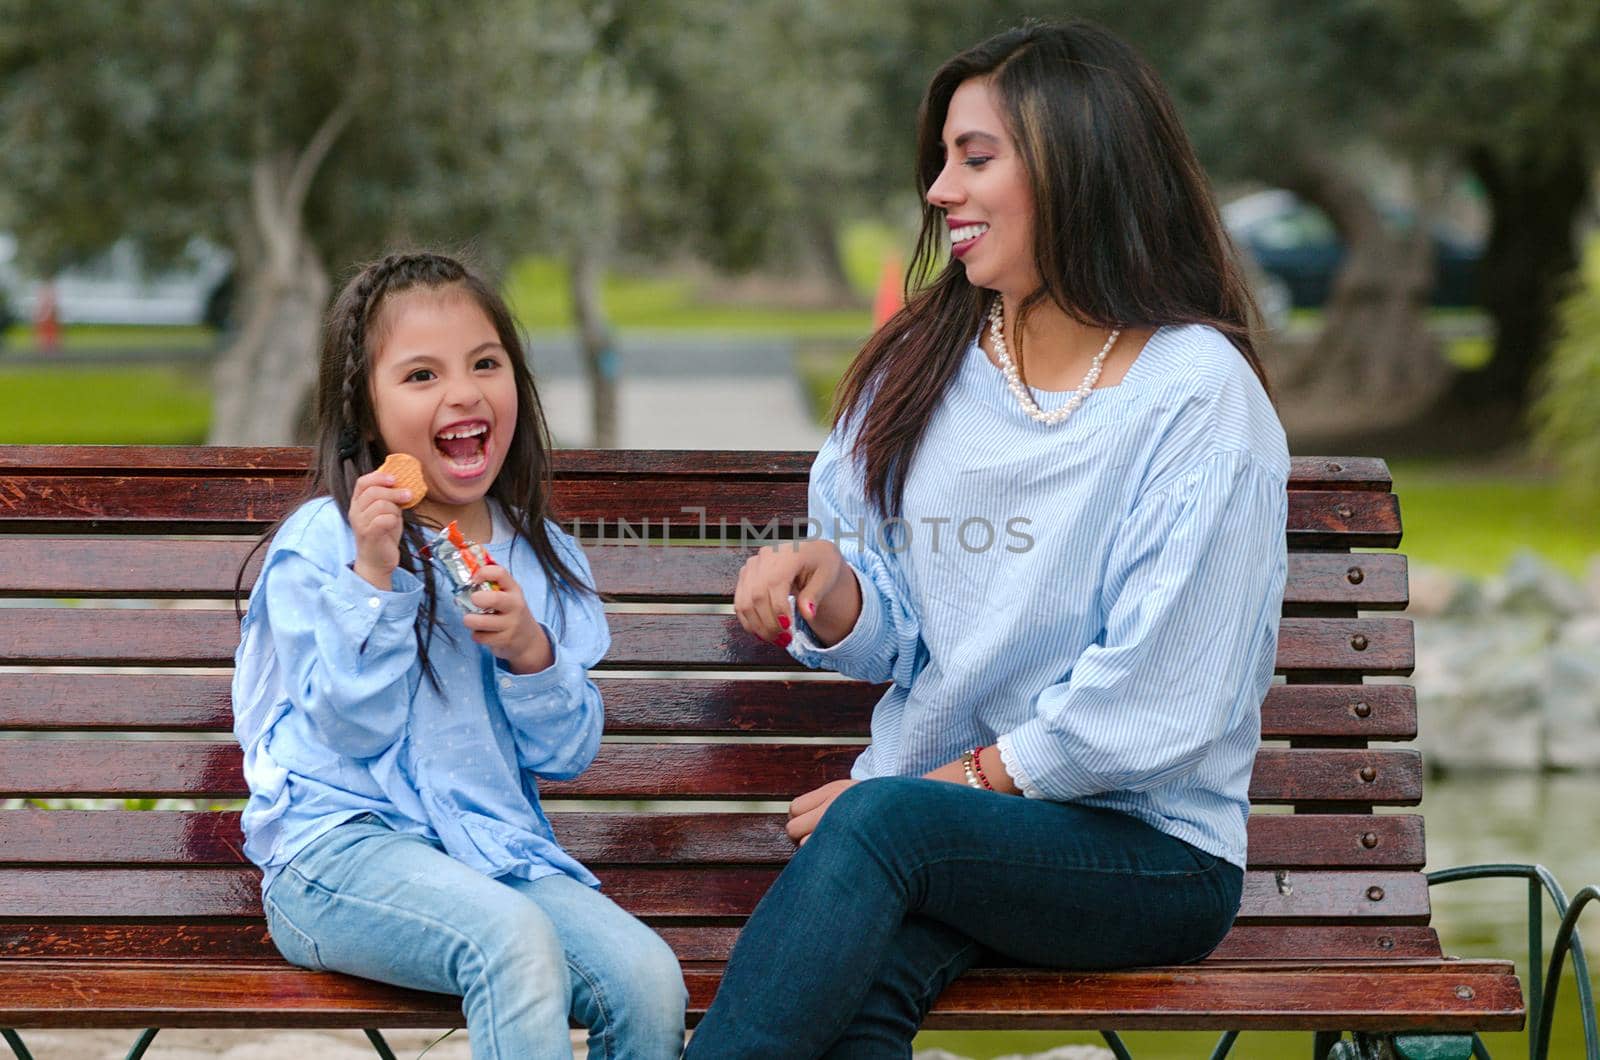 Mother and her little daughter sitting on a bench eating a cookie in the park